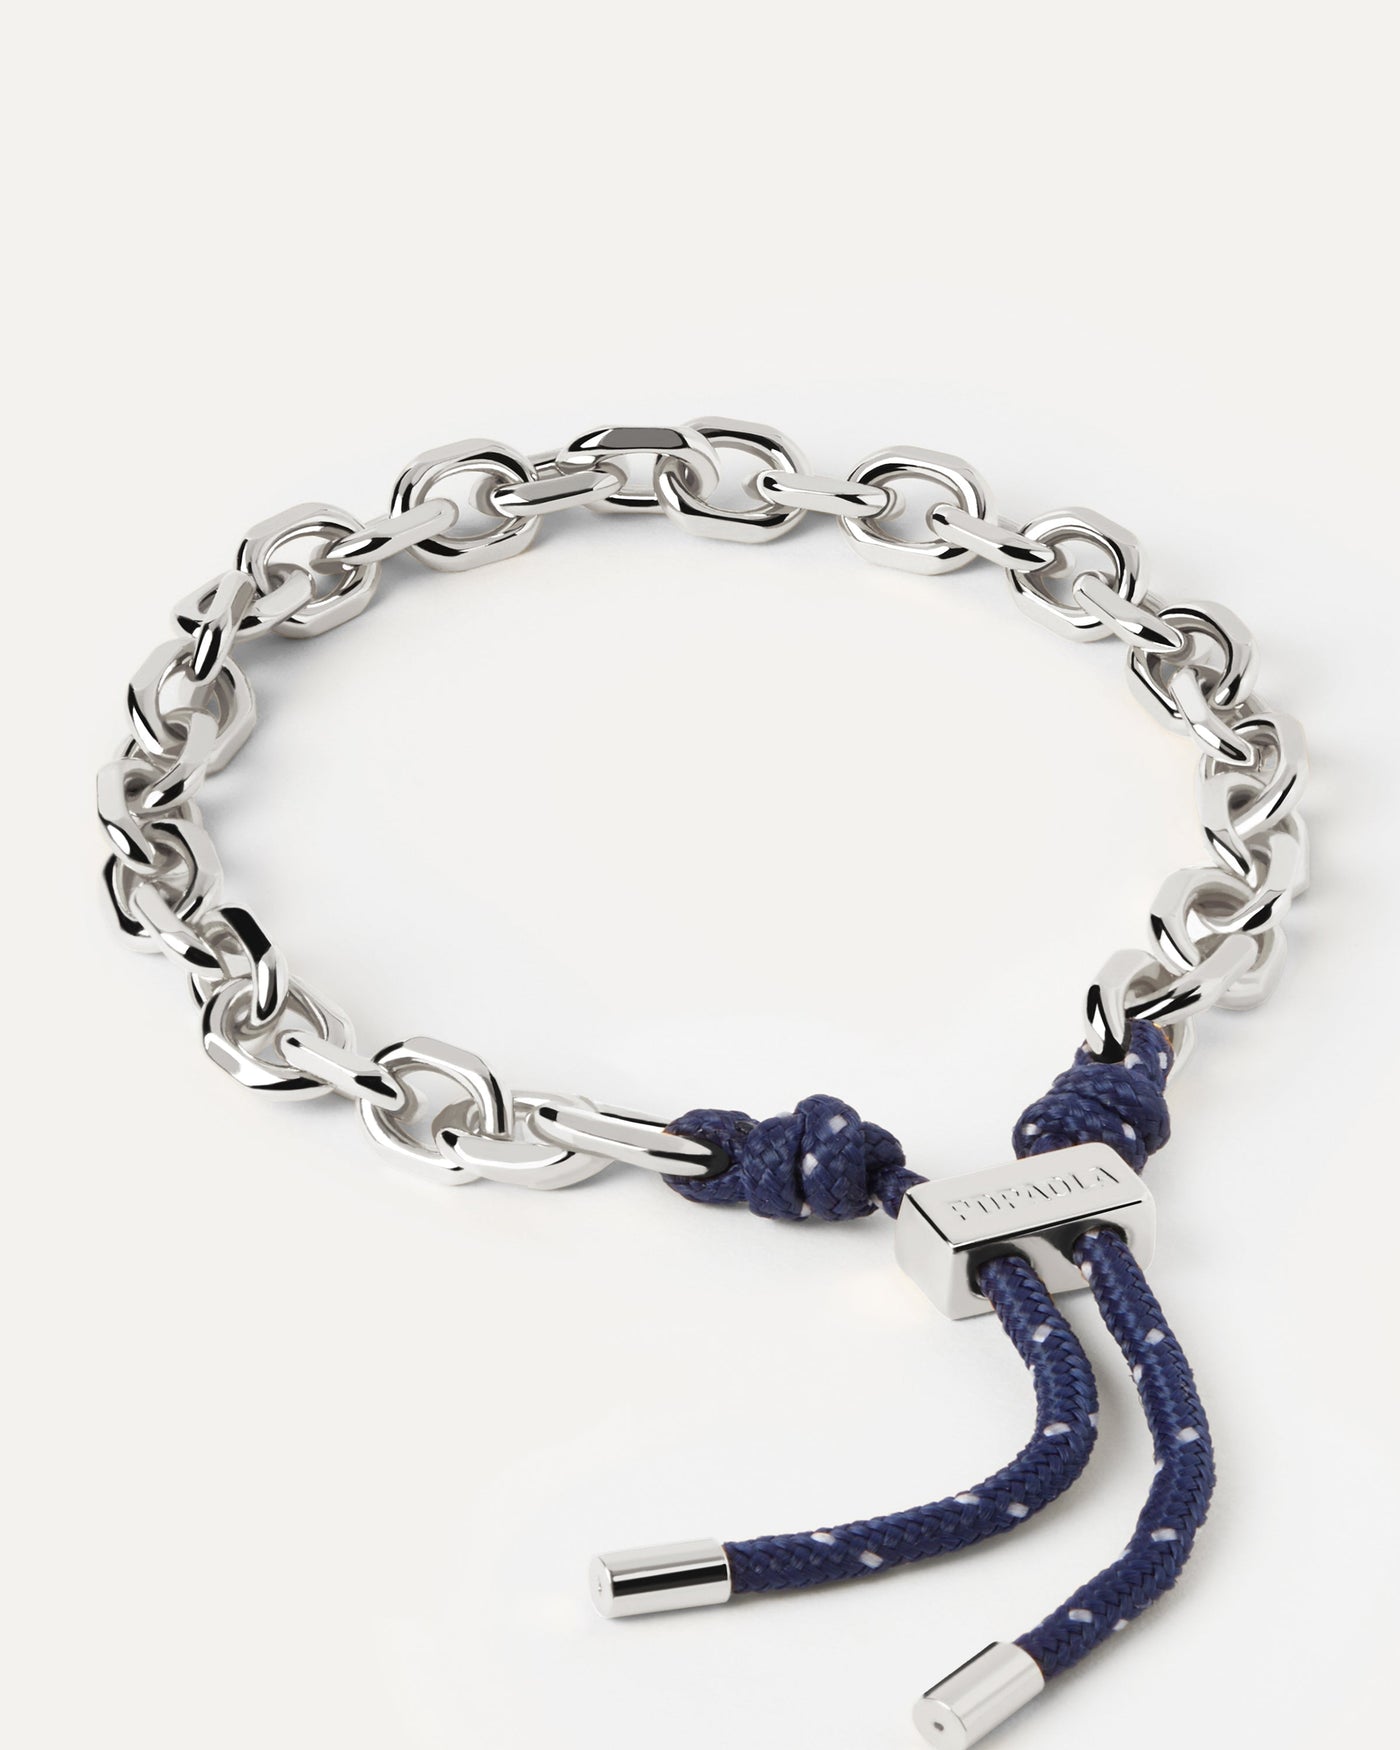 2023 Selection | Midnight Essential Rope and Chain Silver Bracelet. . Get the latest arrival from PDPAOLA. Place your order safely and get this Best Seller. Free Shipping.